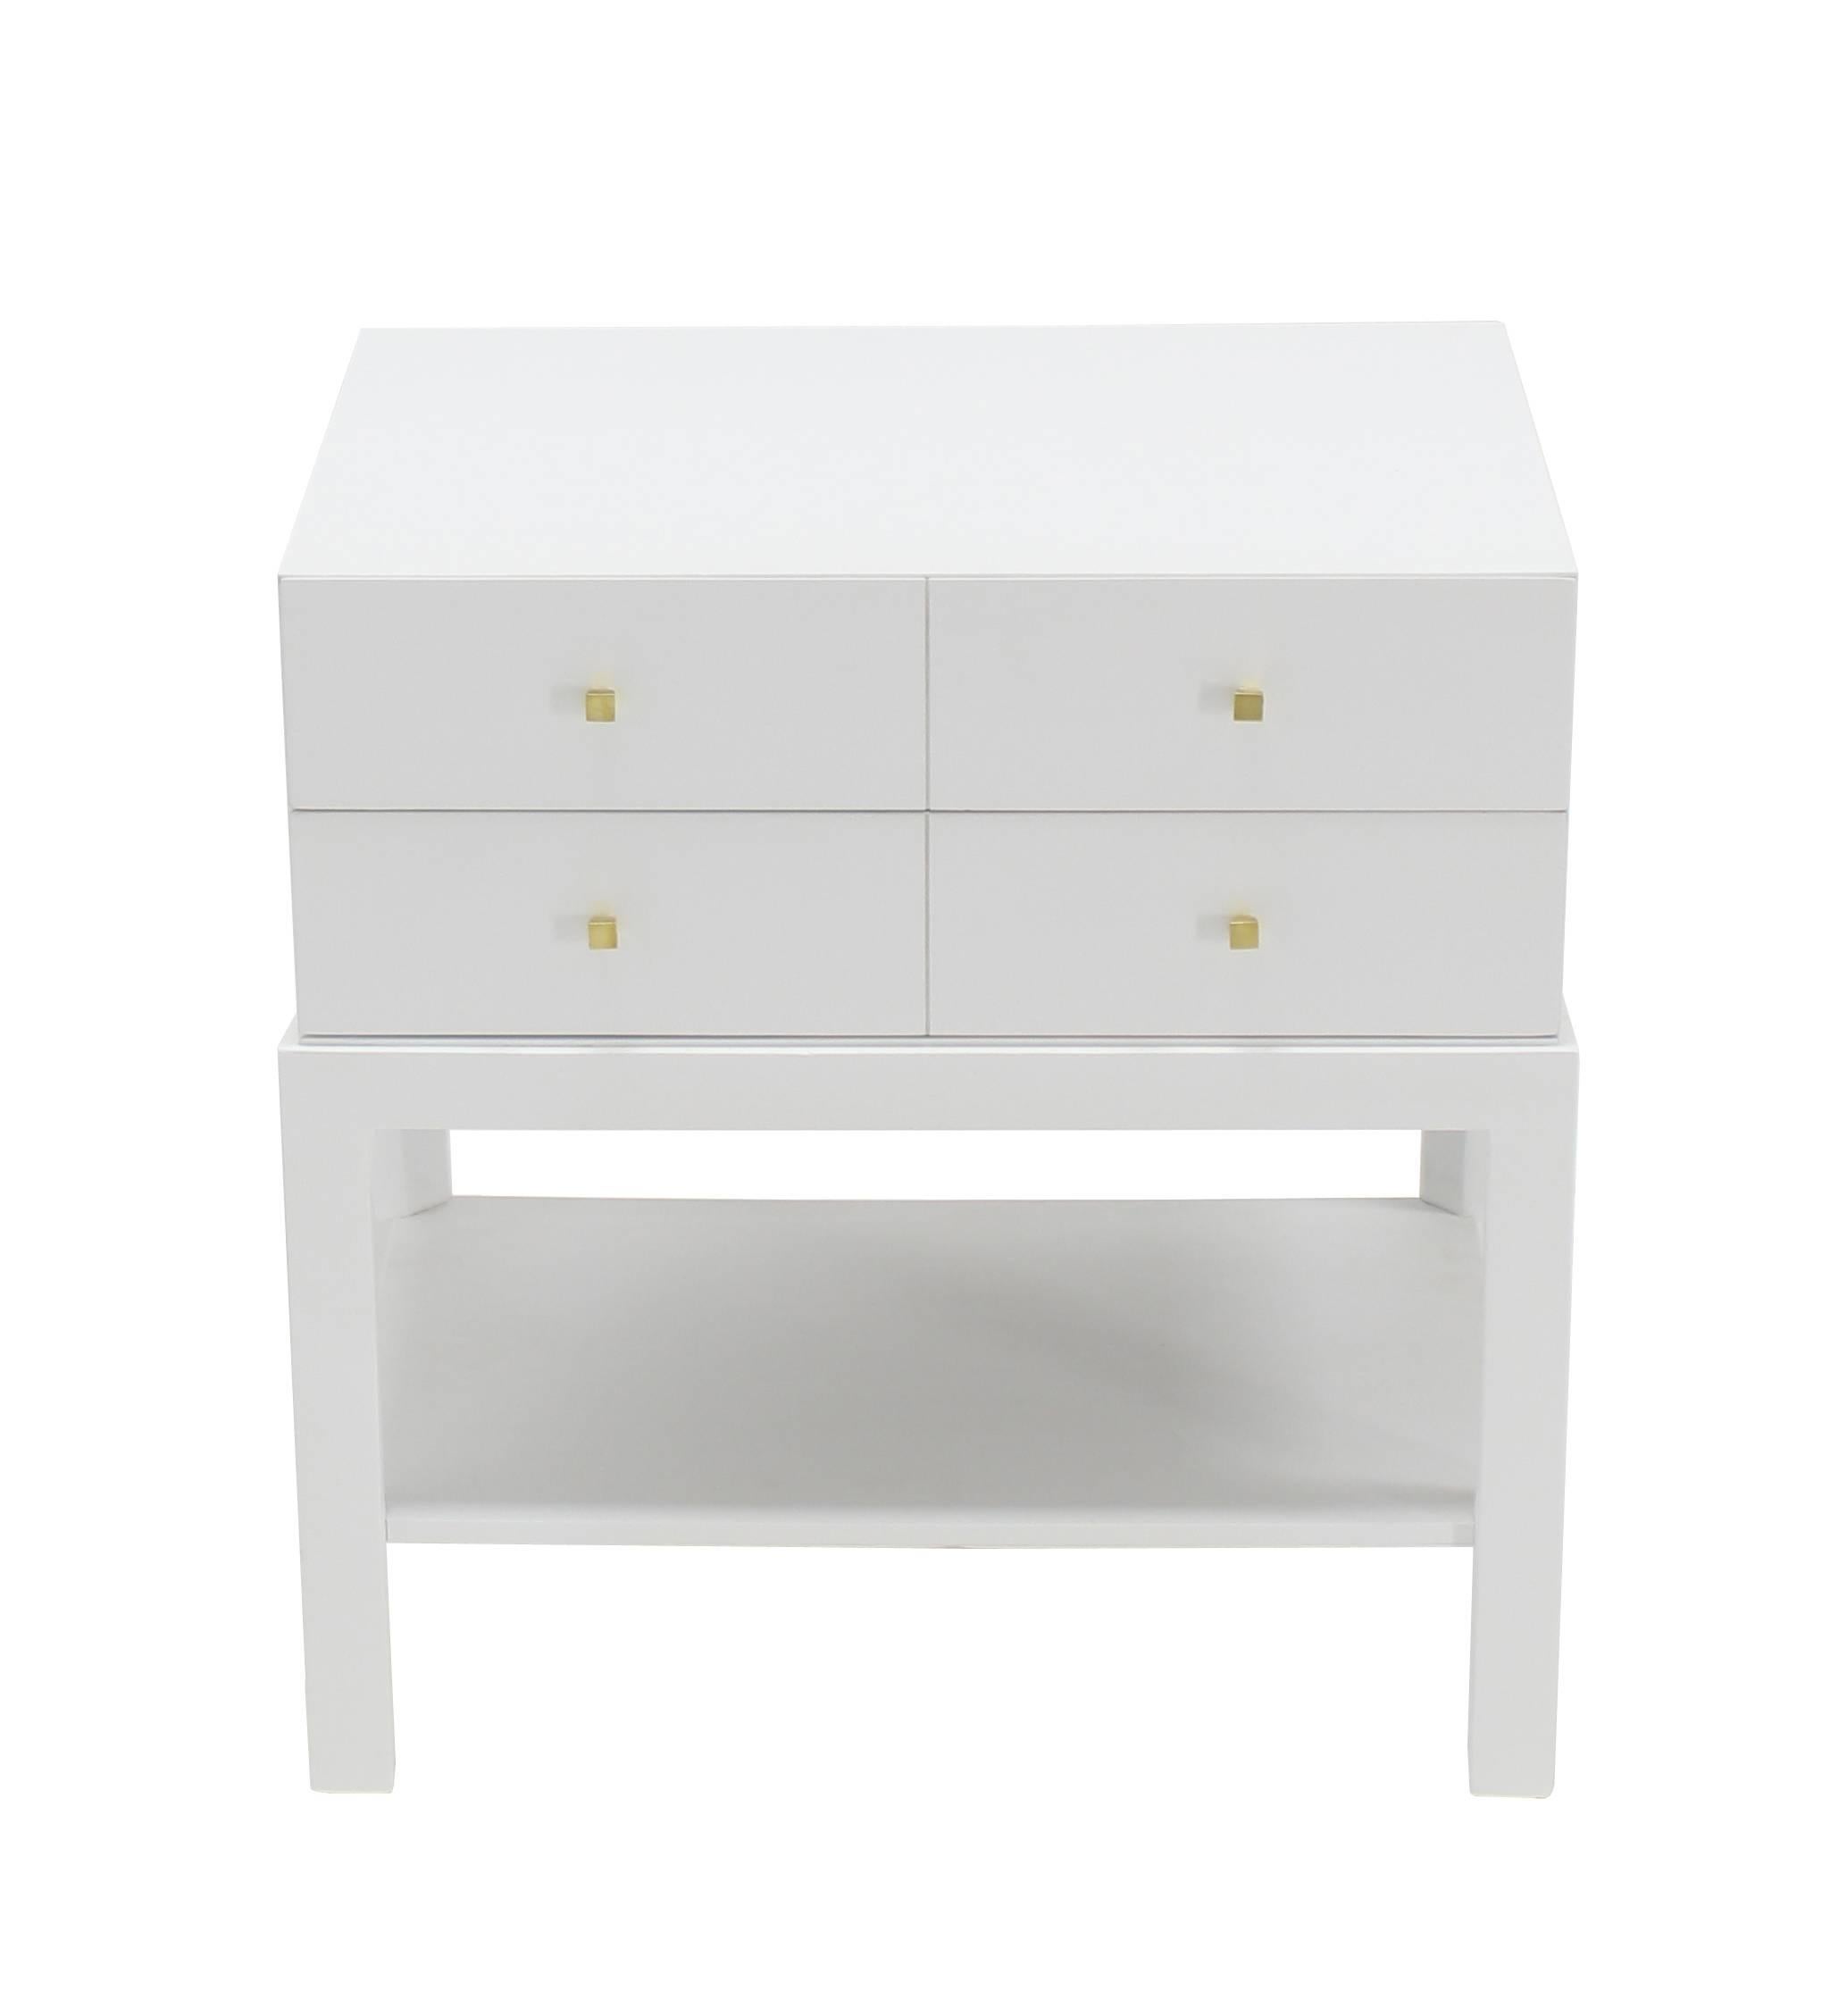 Mid-Century Modern White Lacquer Diamond Shape Brass Dimond Pulls Two Drawer Nightstand For Sale